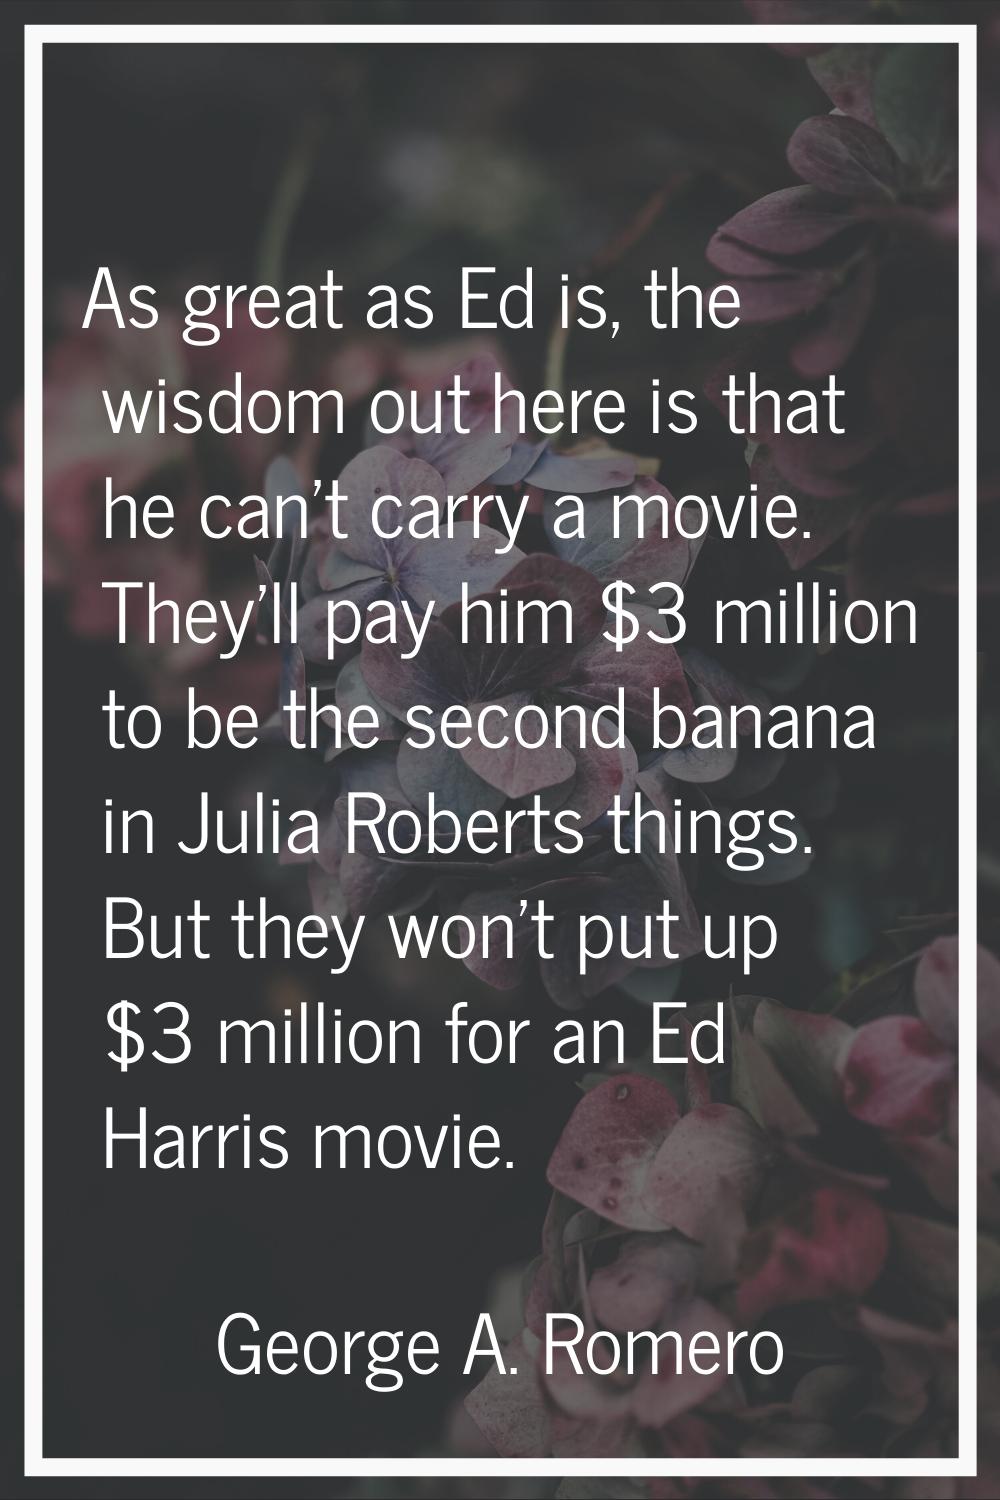 As great as Ed is, the wisdom out here is that he can't carry a movie. They'll pay him $3 million t